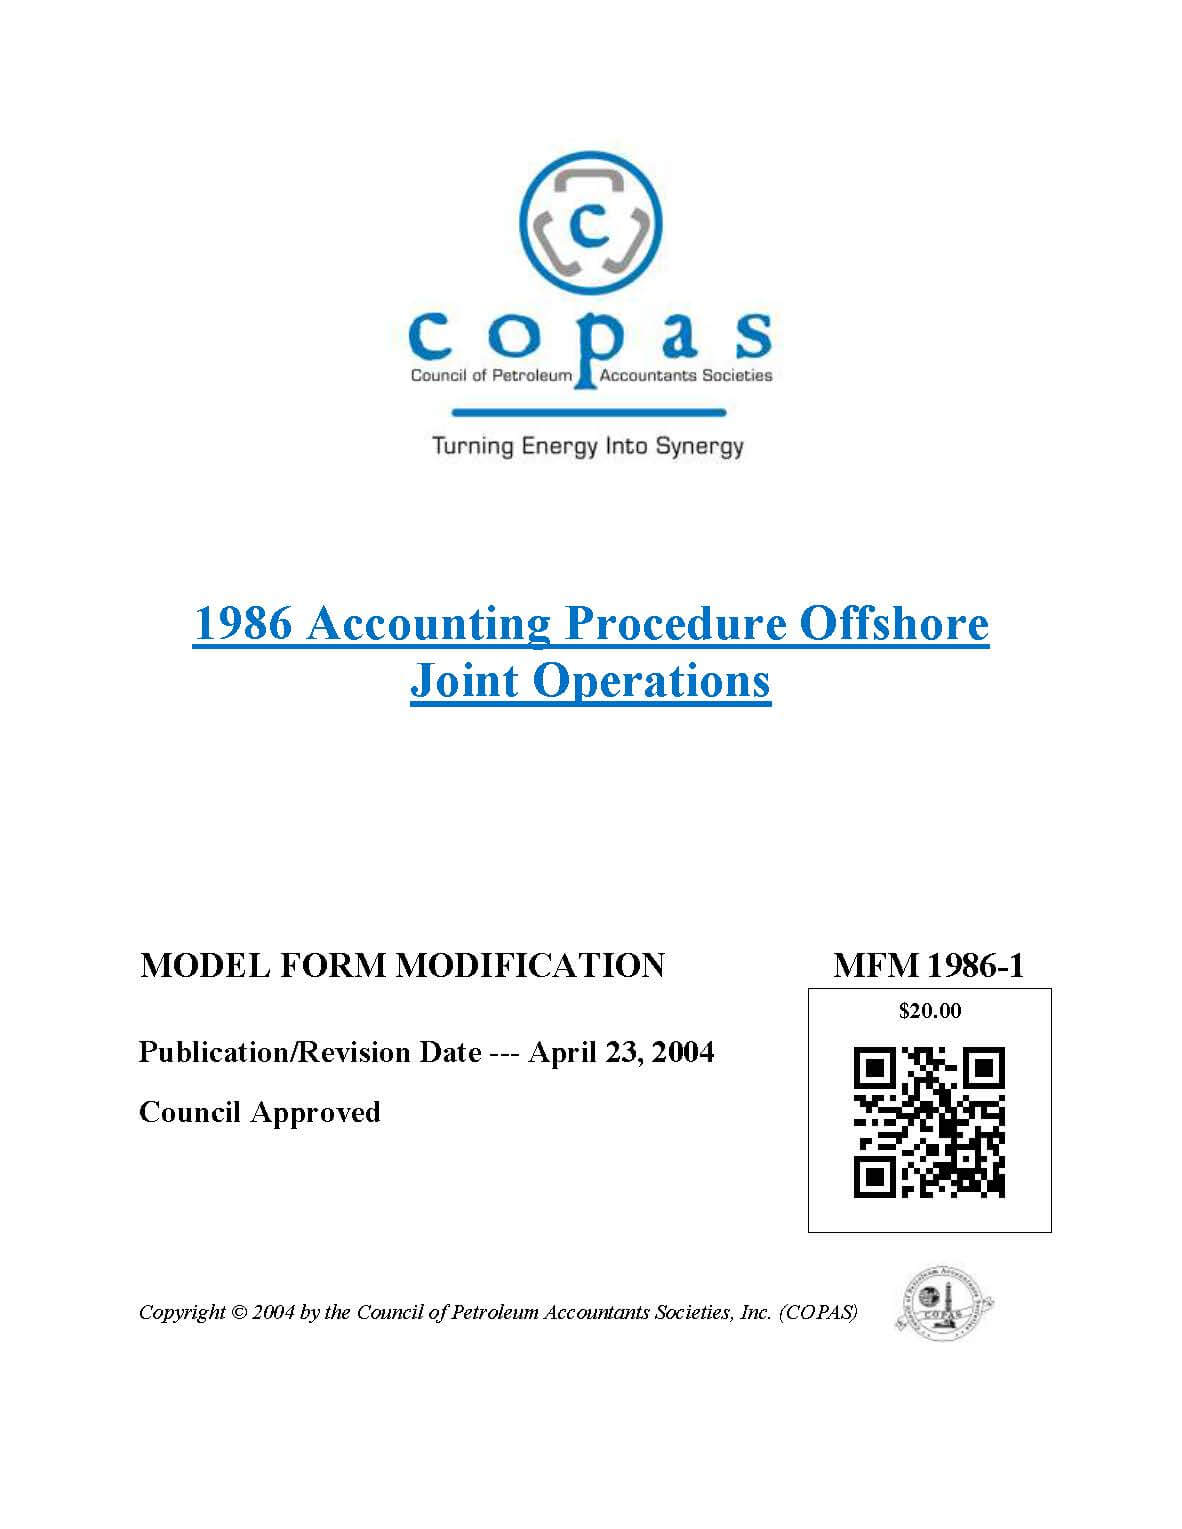 MFM-1986-1 1986 Accounting Procedure Offshore Joint Operations Model Form Modification - products MFM 1986 1 - Council of Petroleum Accountants Societies